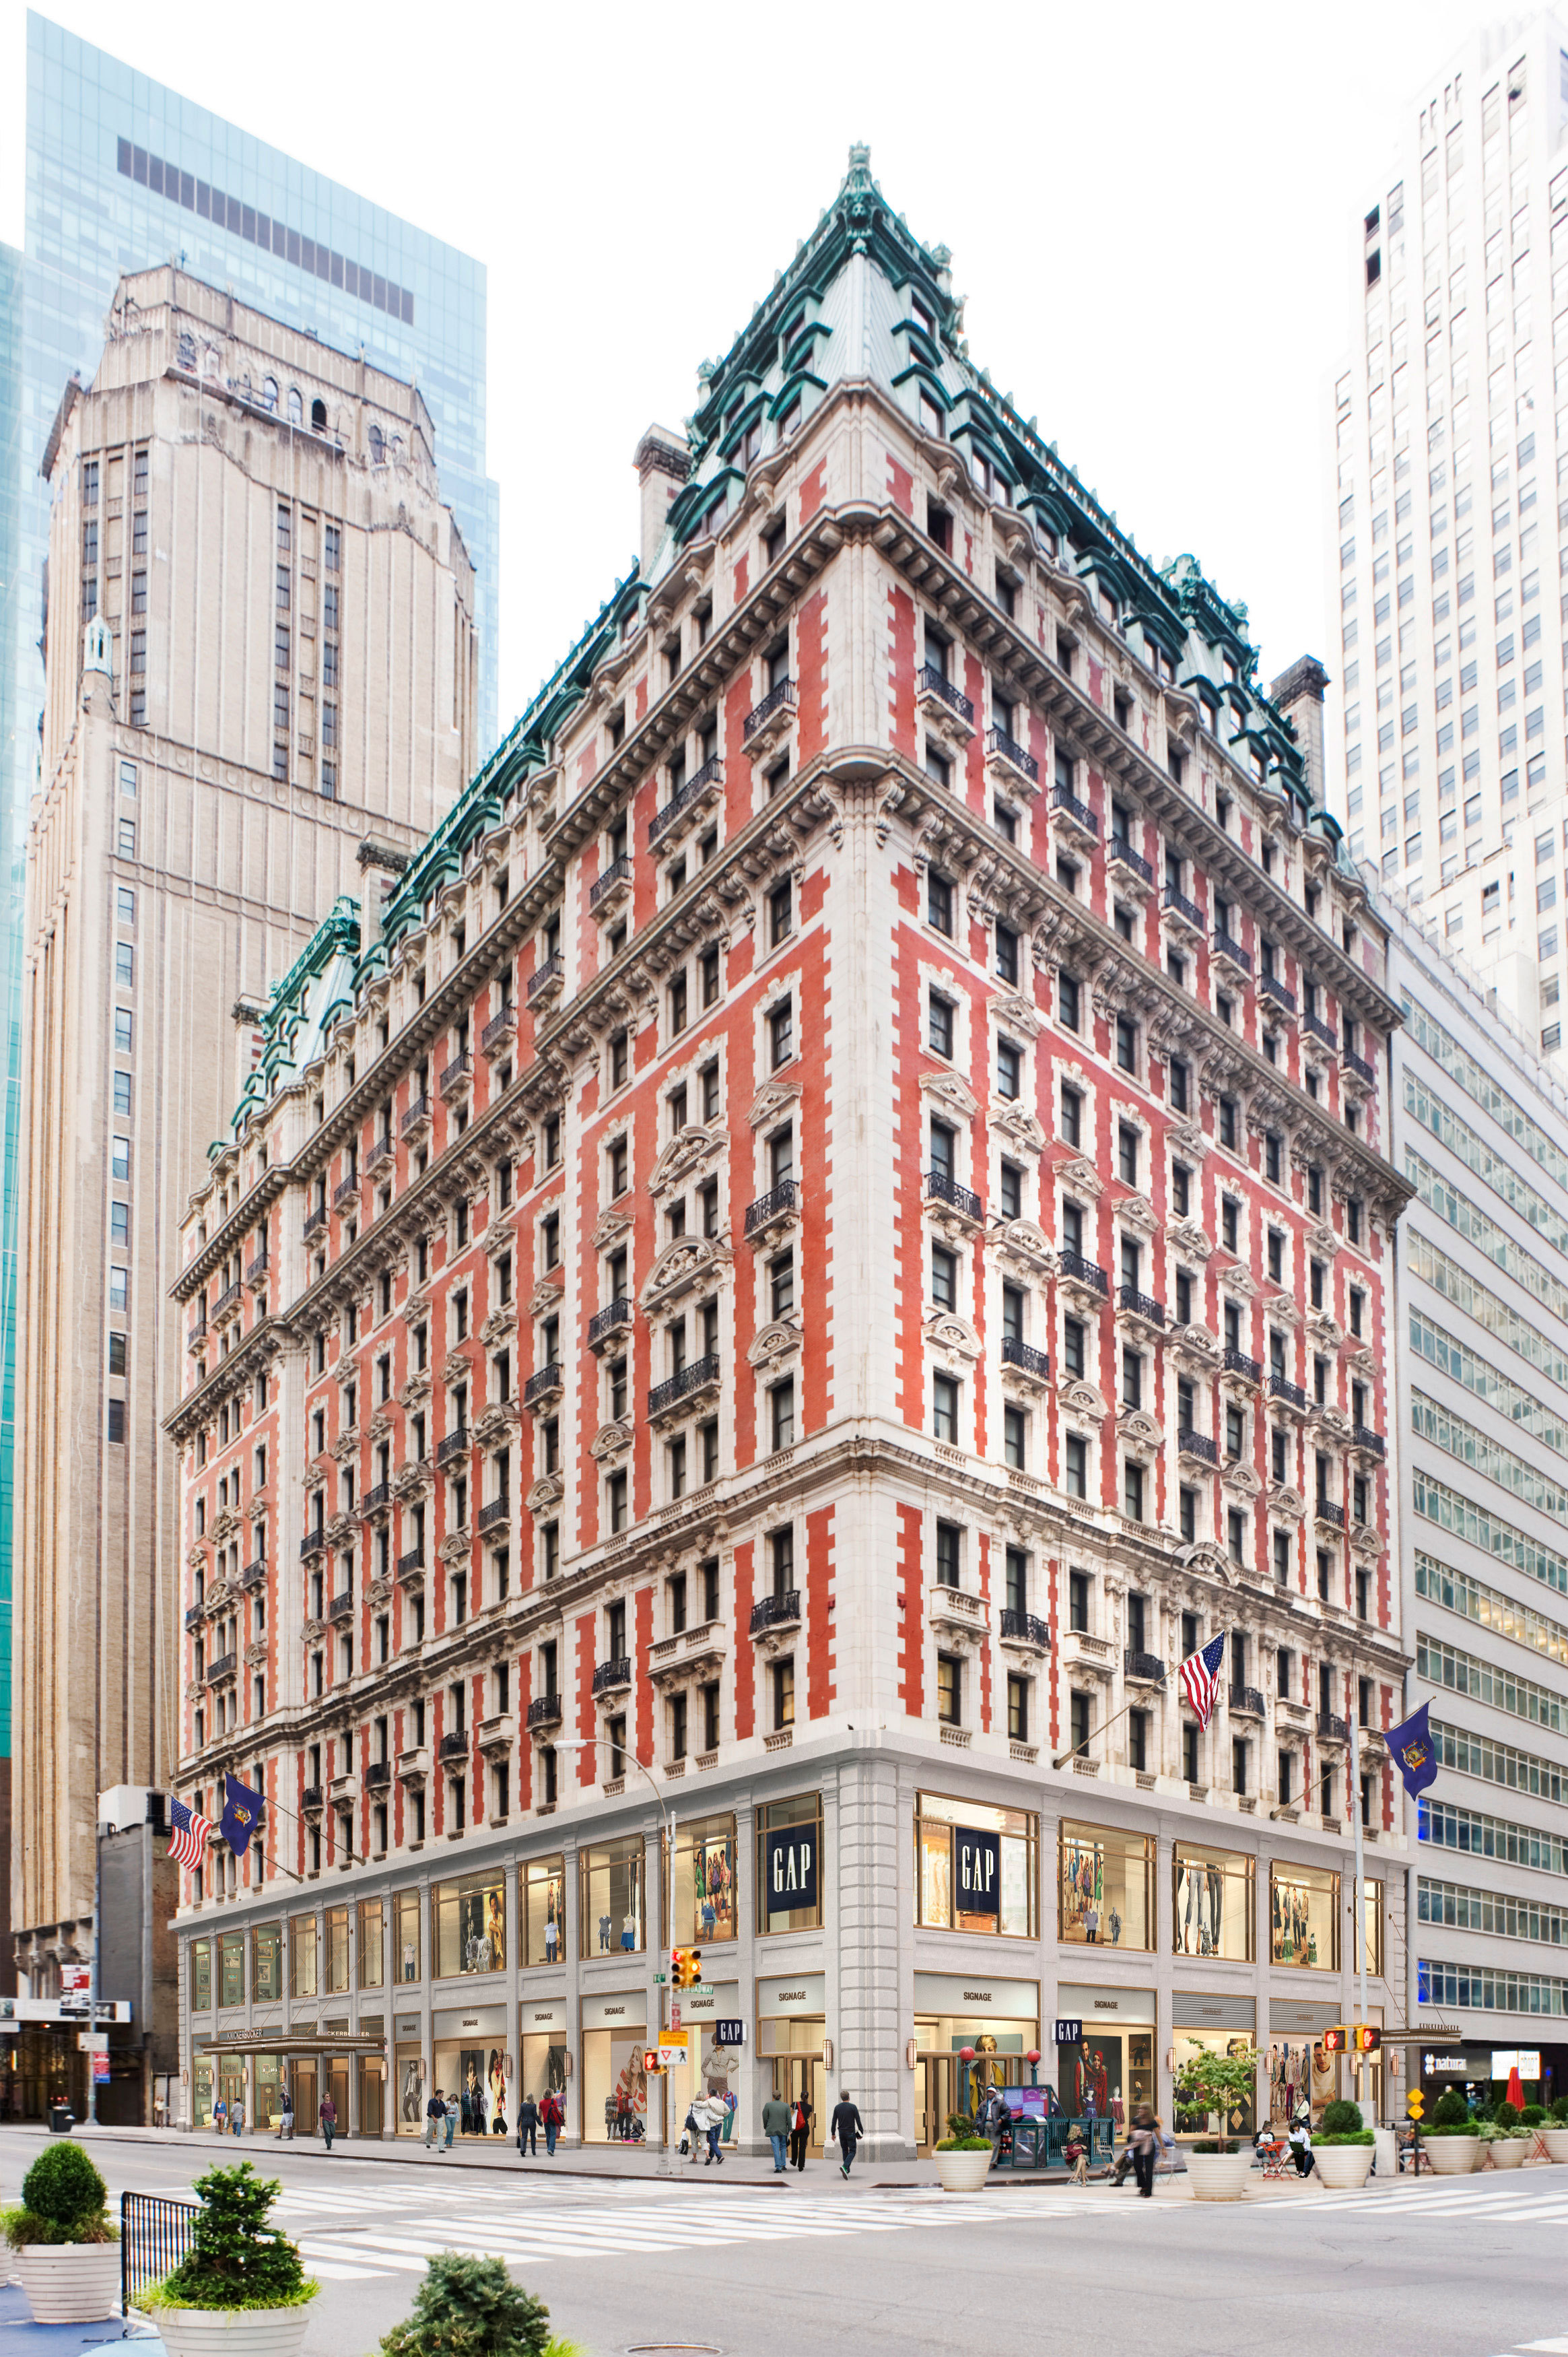 FelCor Announces the Opening of the Knickerbocker Hotel | Business Wire